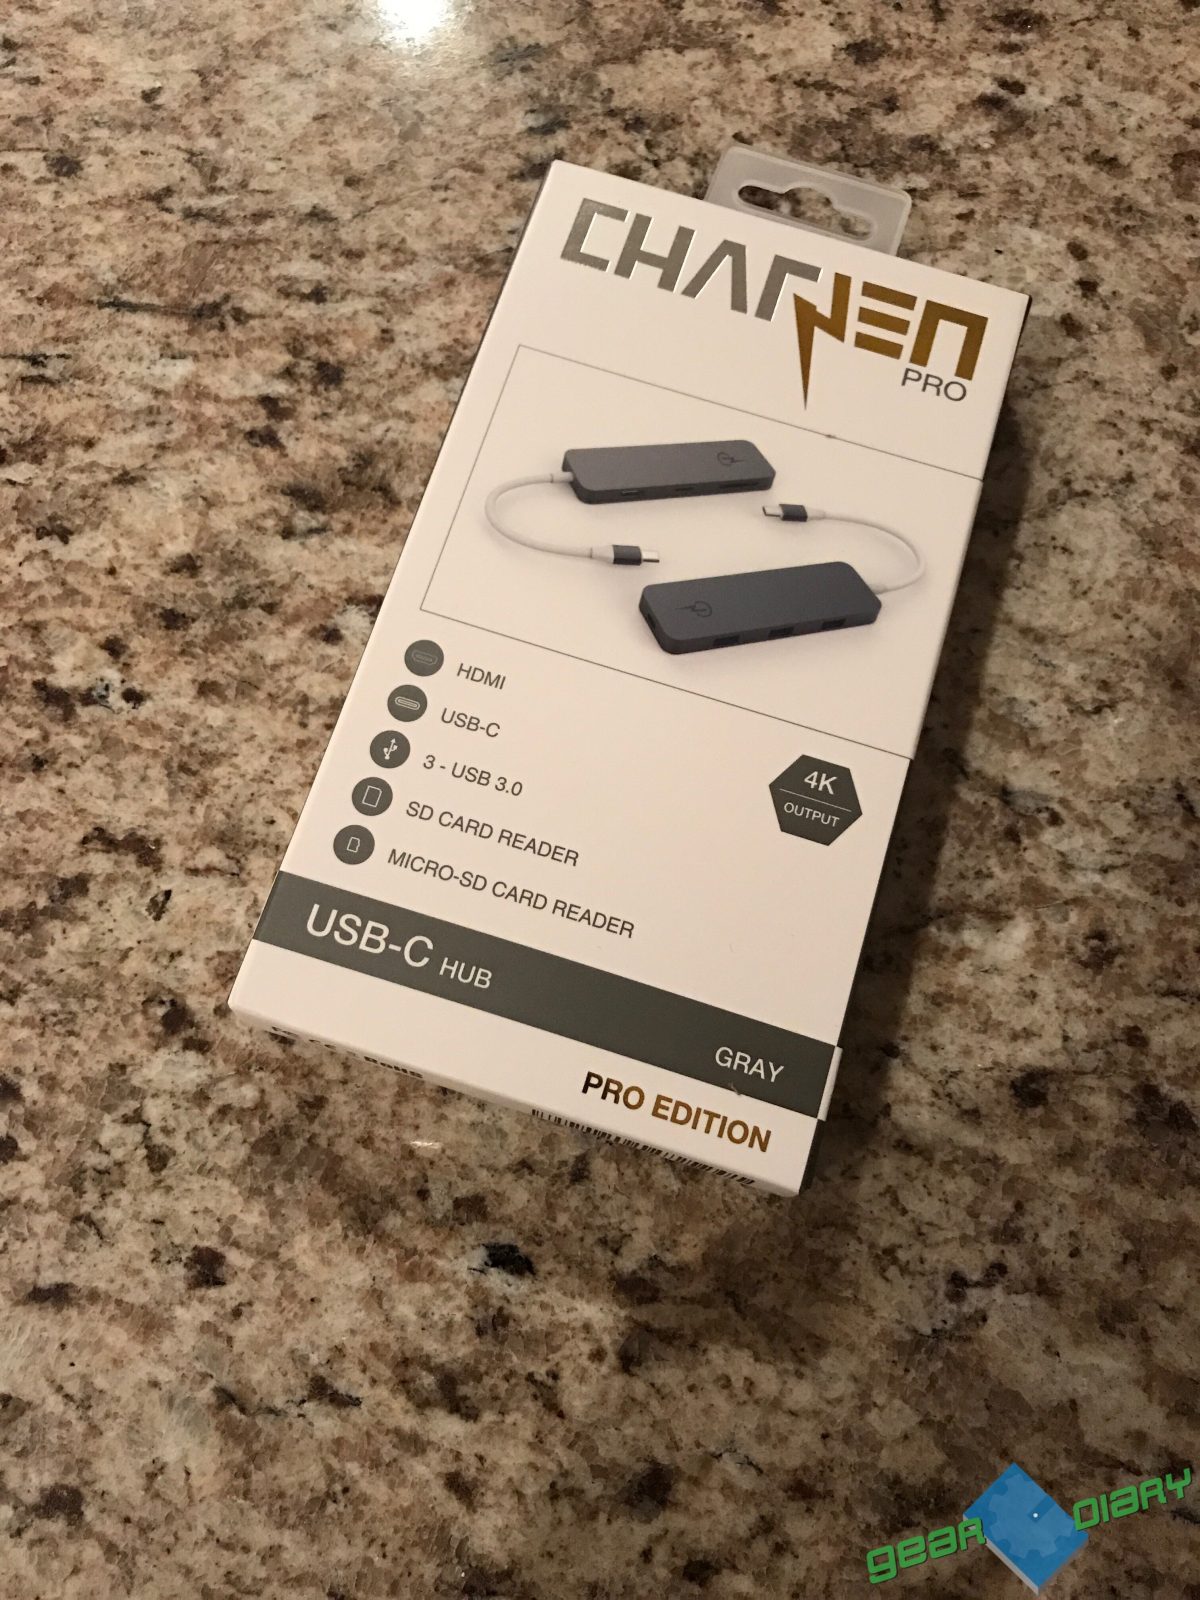 CharJenPro USB-C Hub for MacBook Pro: No Need for a Bag of Dongles